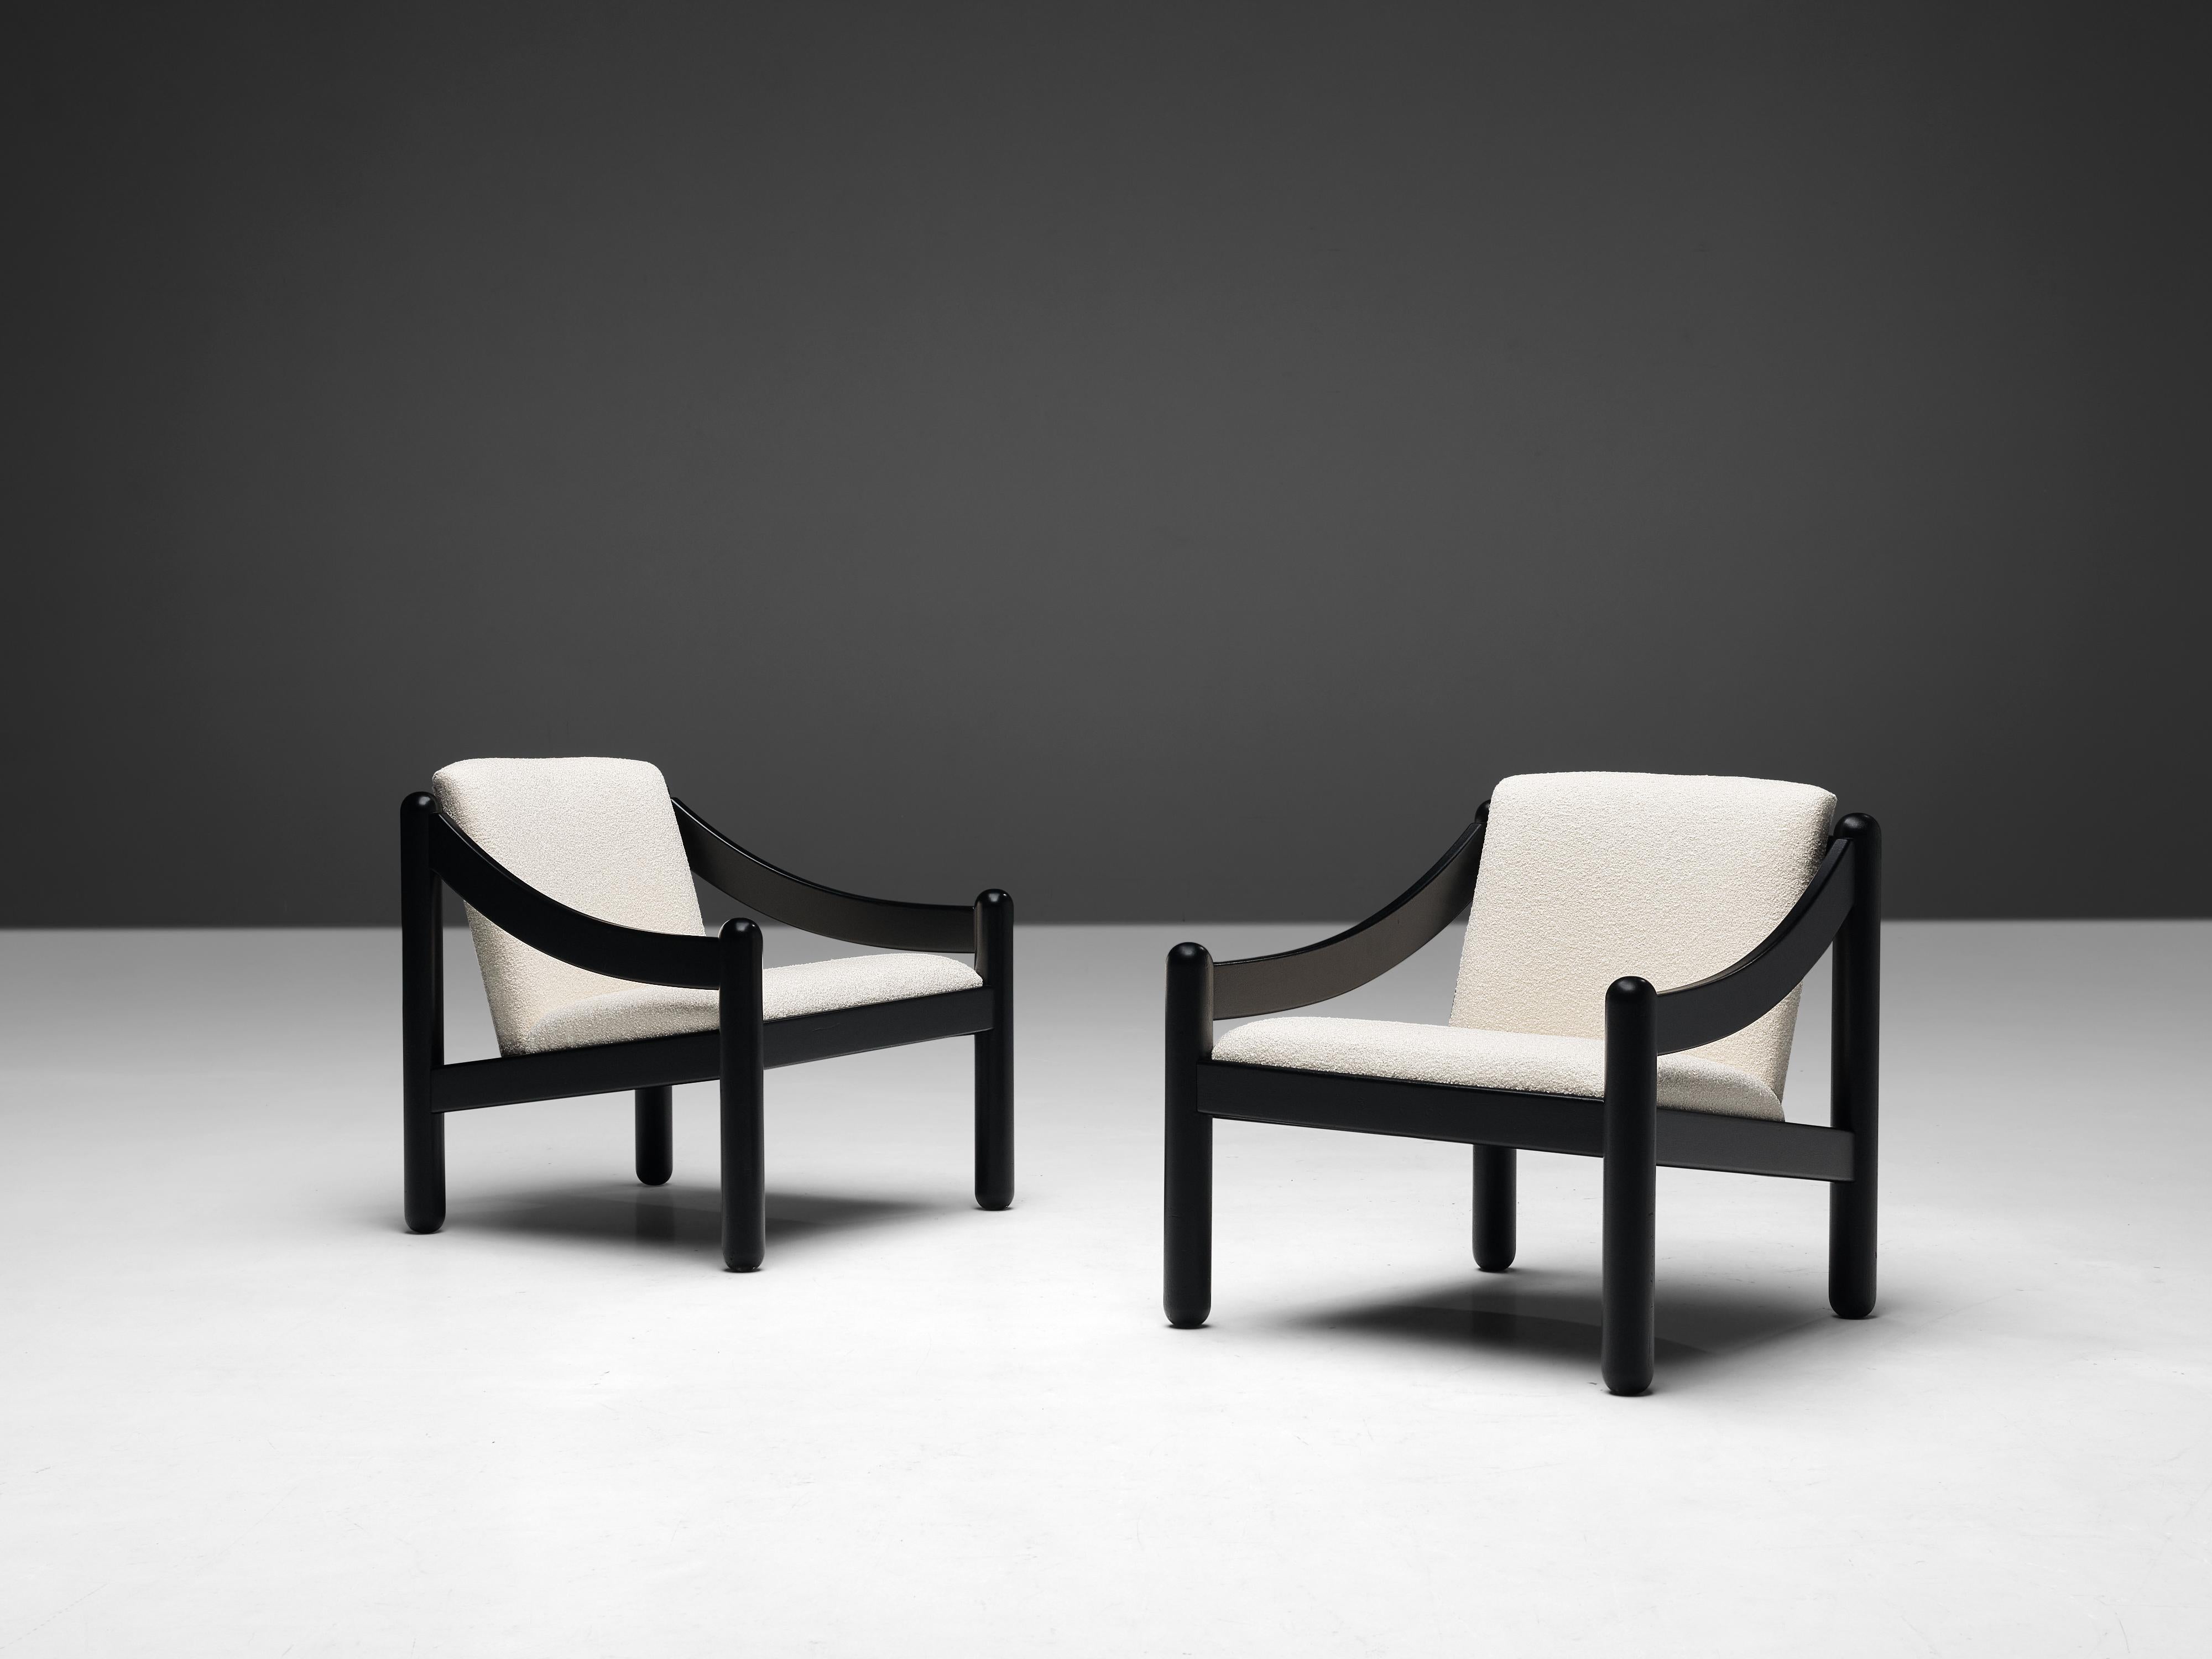 Vico Magistretti for Cassina, pair of ‘Carimate’ lounge chairs, lacquered beech, bouclé, Italy, designed circa 1960

The ‘Carimate’ lounge chair is one of Vico Magistretti’s most famous chairs. Originally, the chair had a red color and was designed